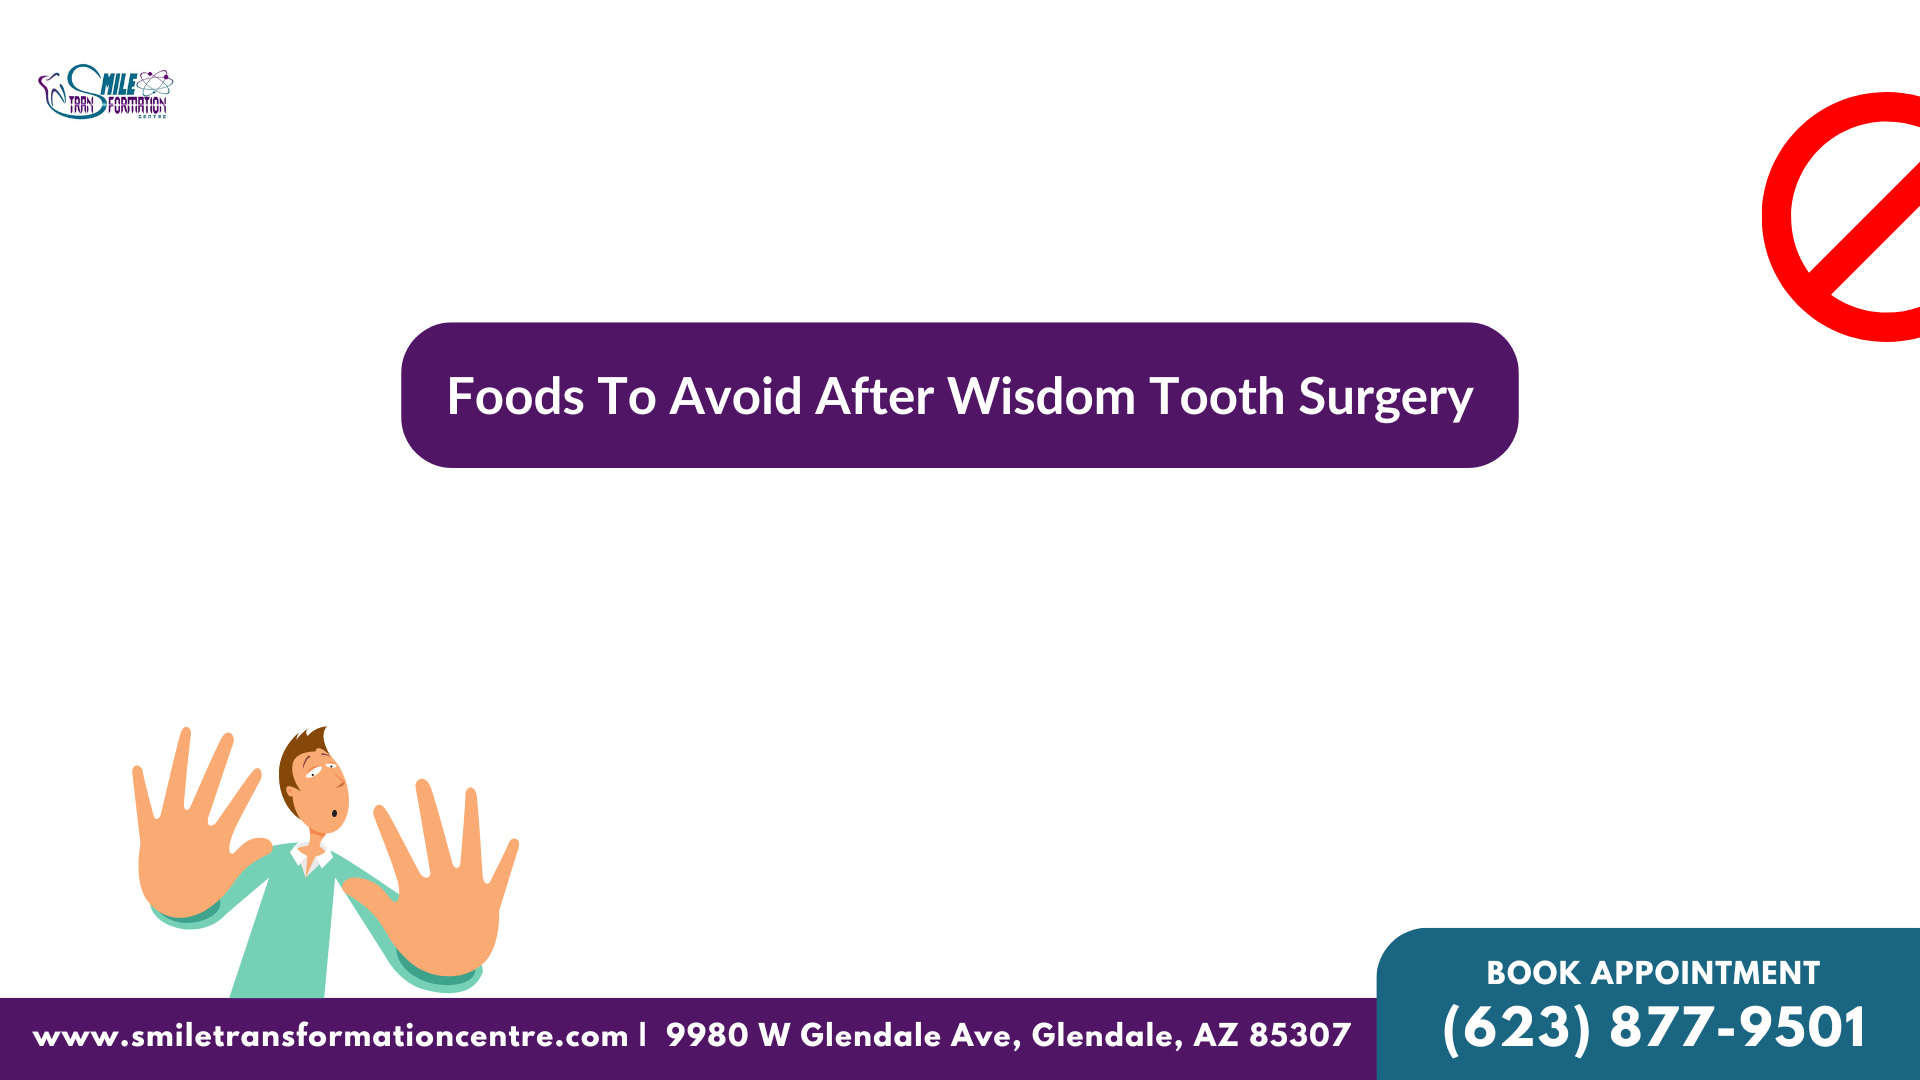 Foods to Avoid After Wisdom Tooth Surgery